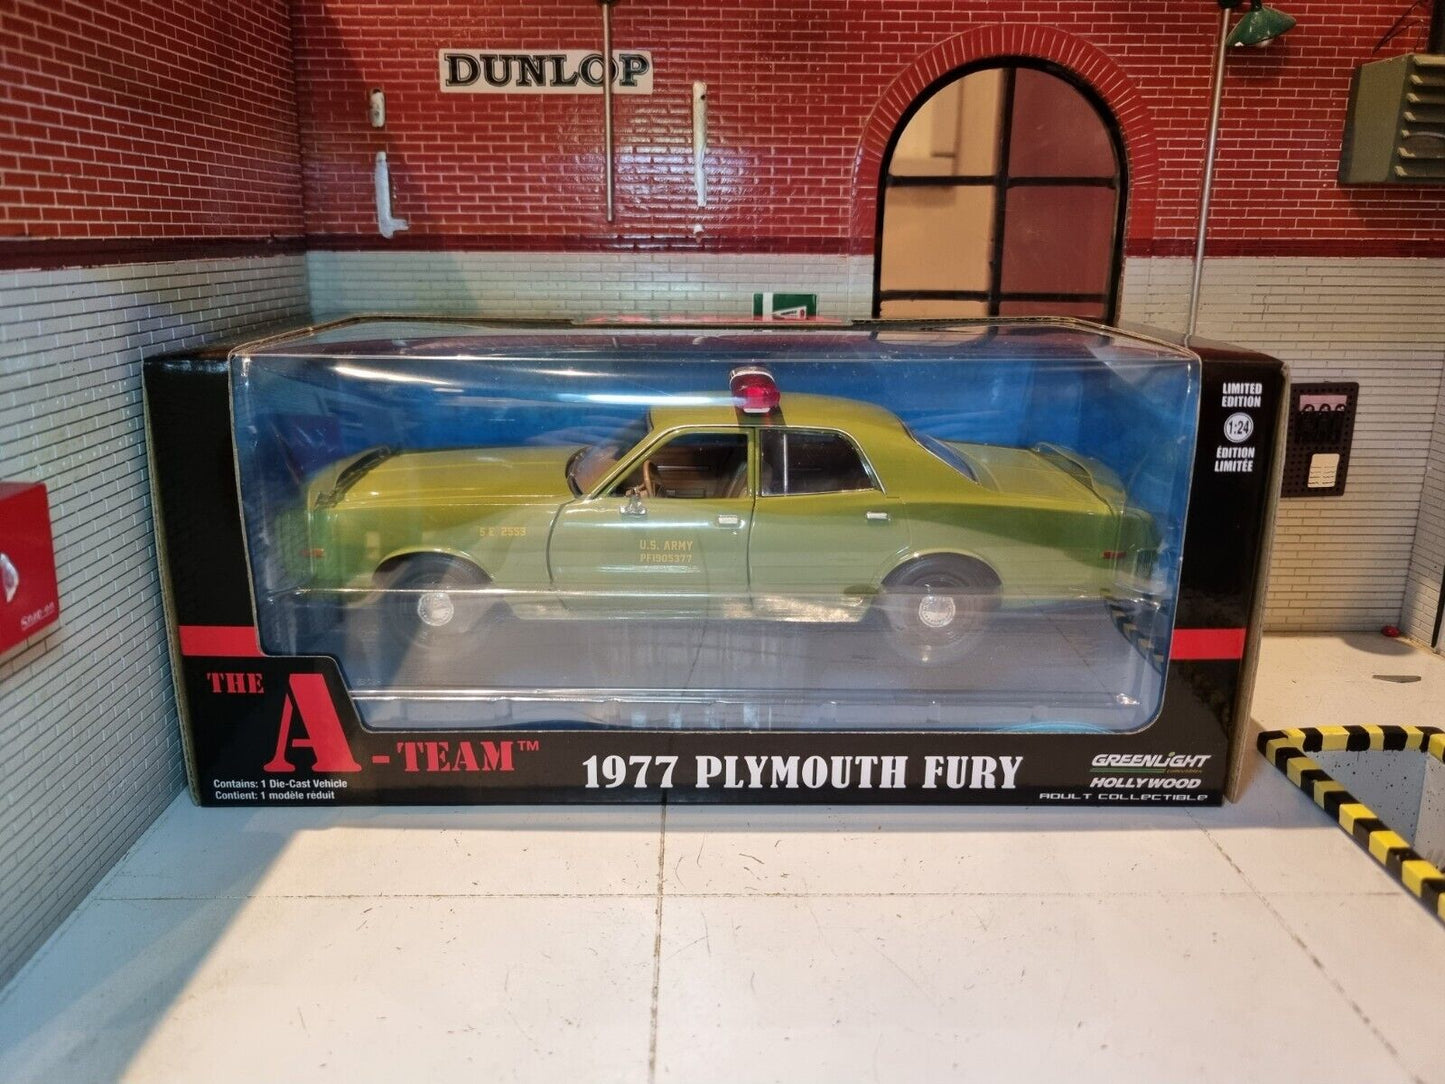 Boxed 1:24 Scale Green Plymouth Fury, with "The A Team" Logo displayed on the box